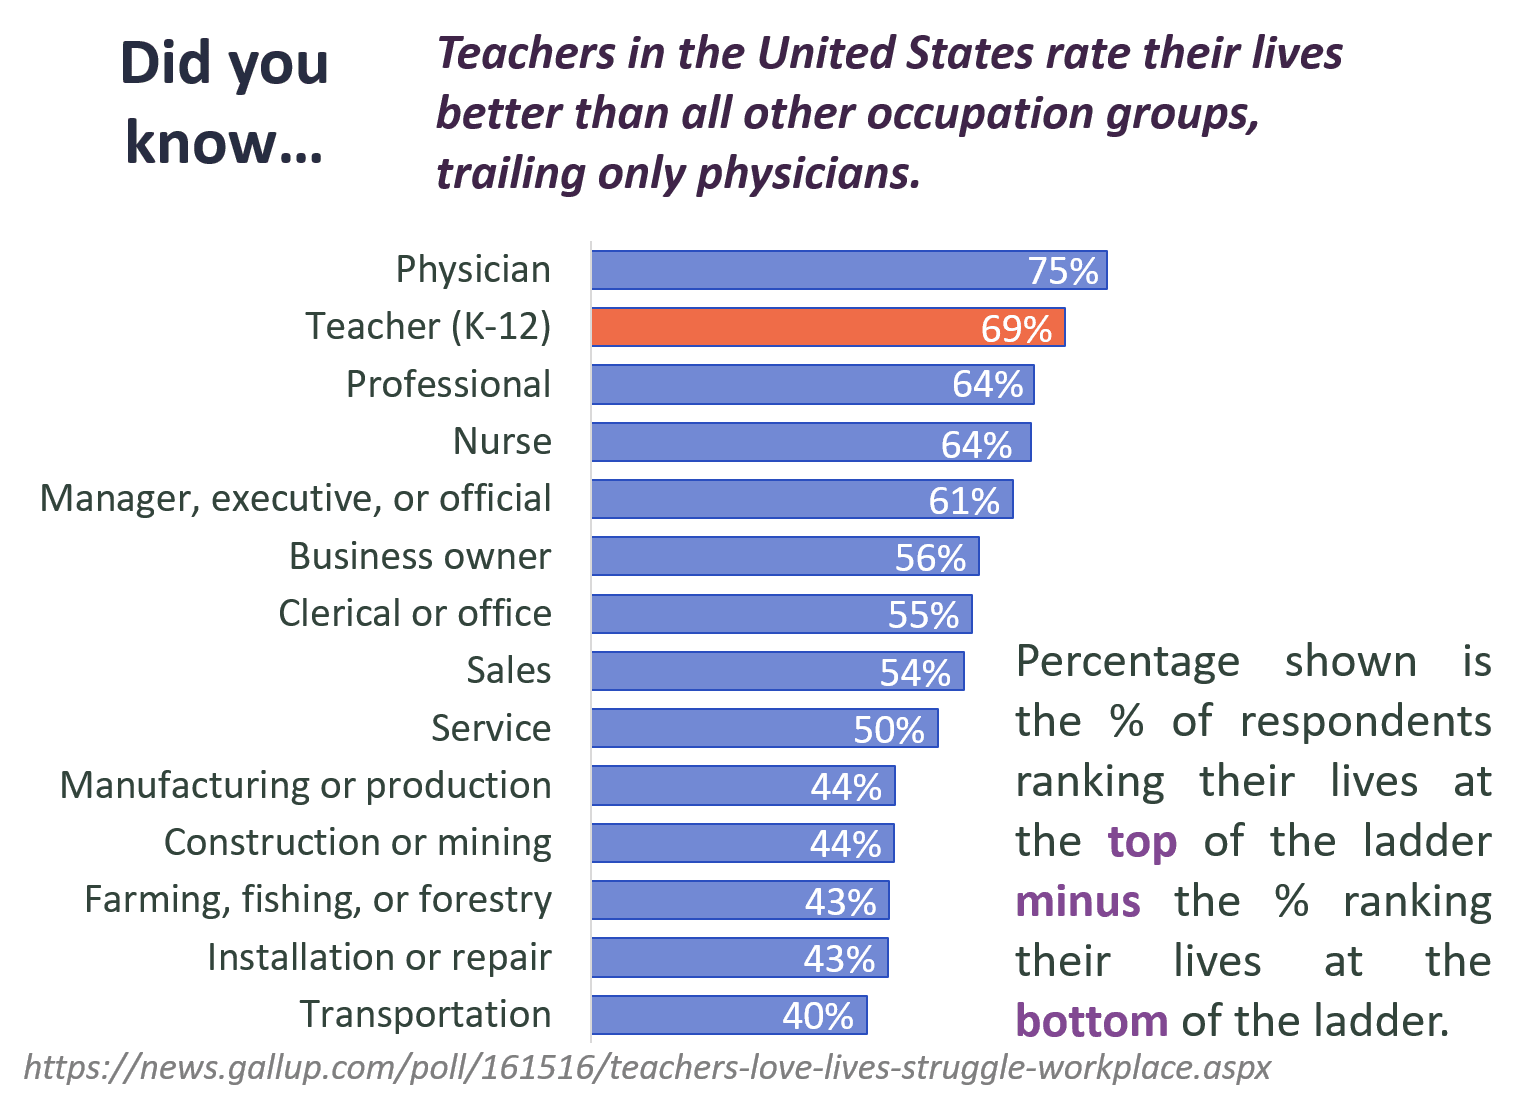 Various statistics about teachers and how they rank their lives